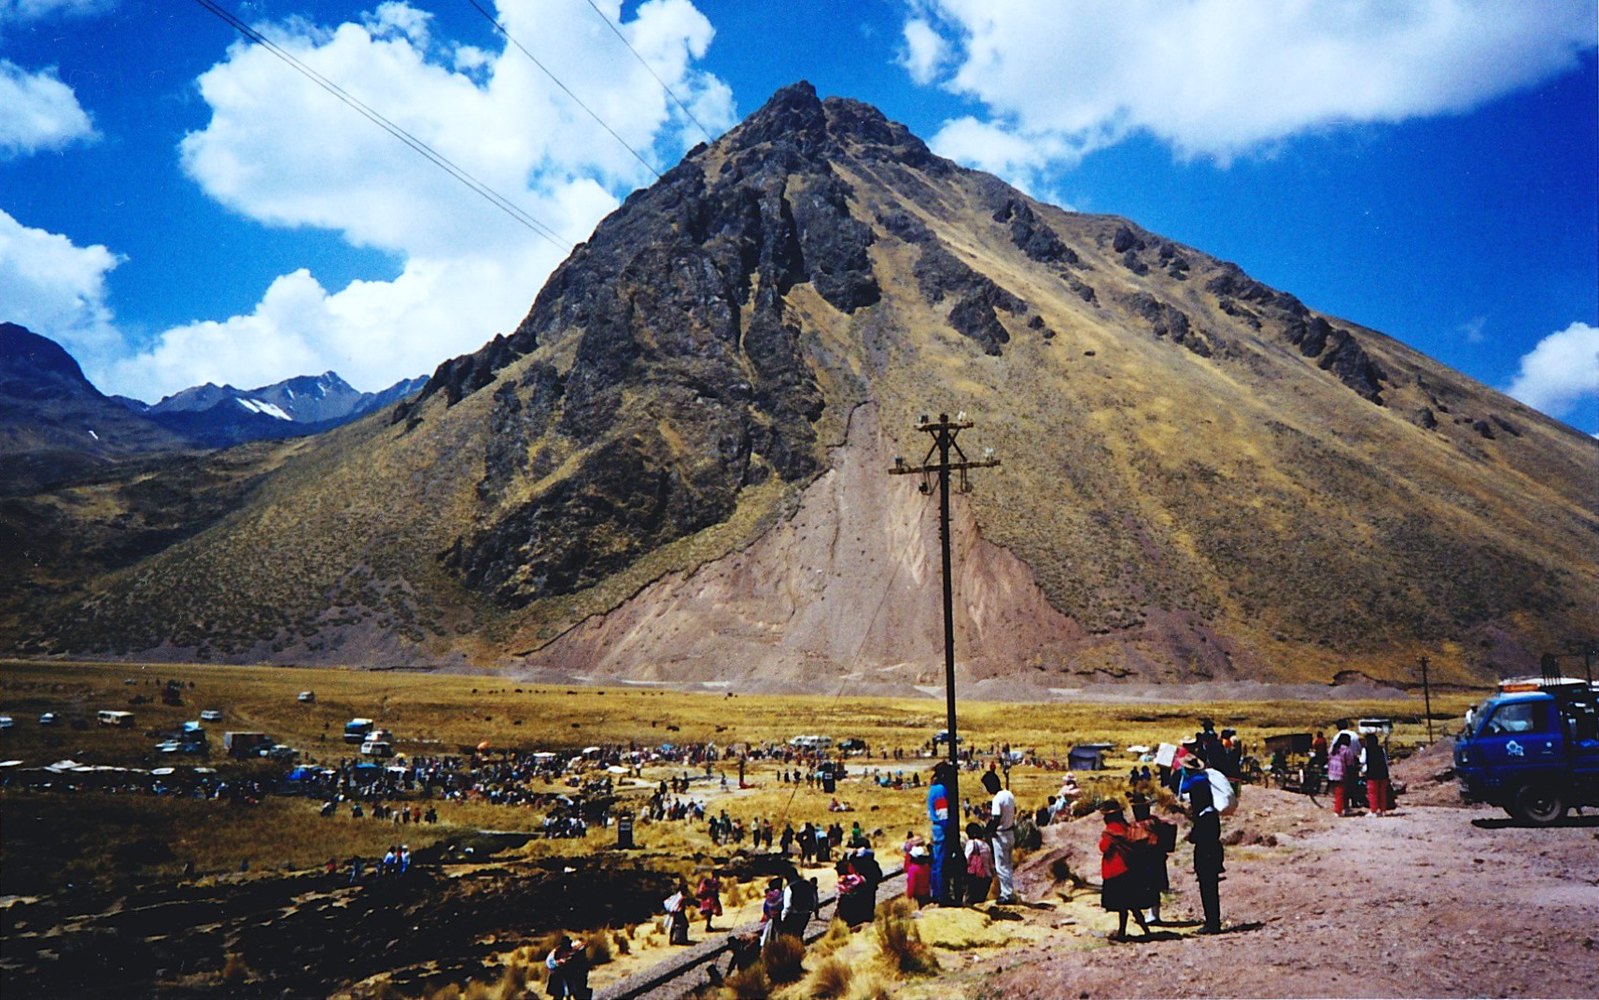 Market in the Andes